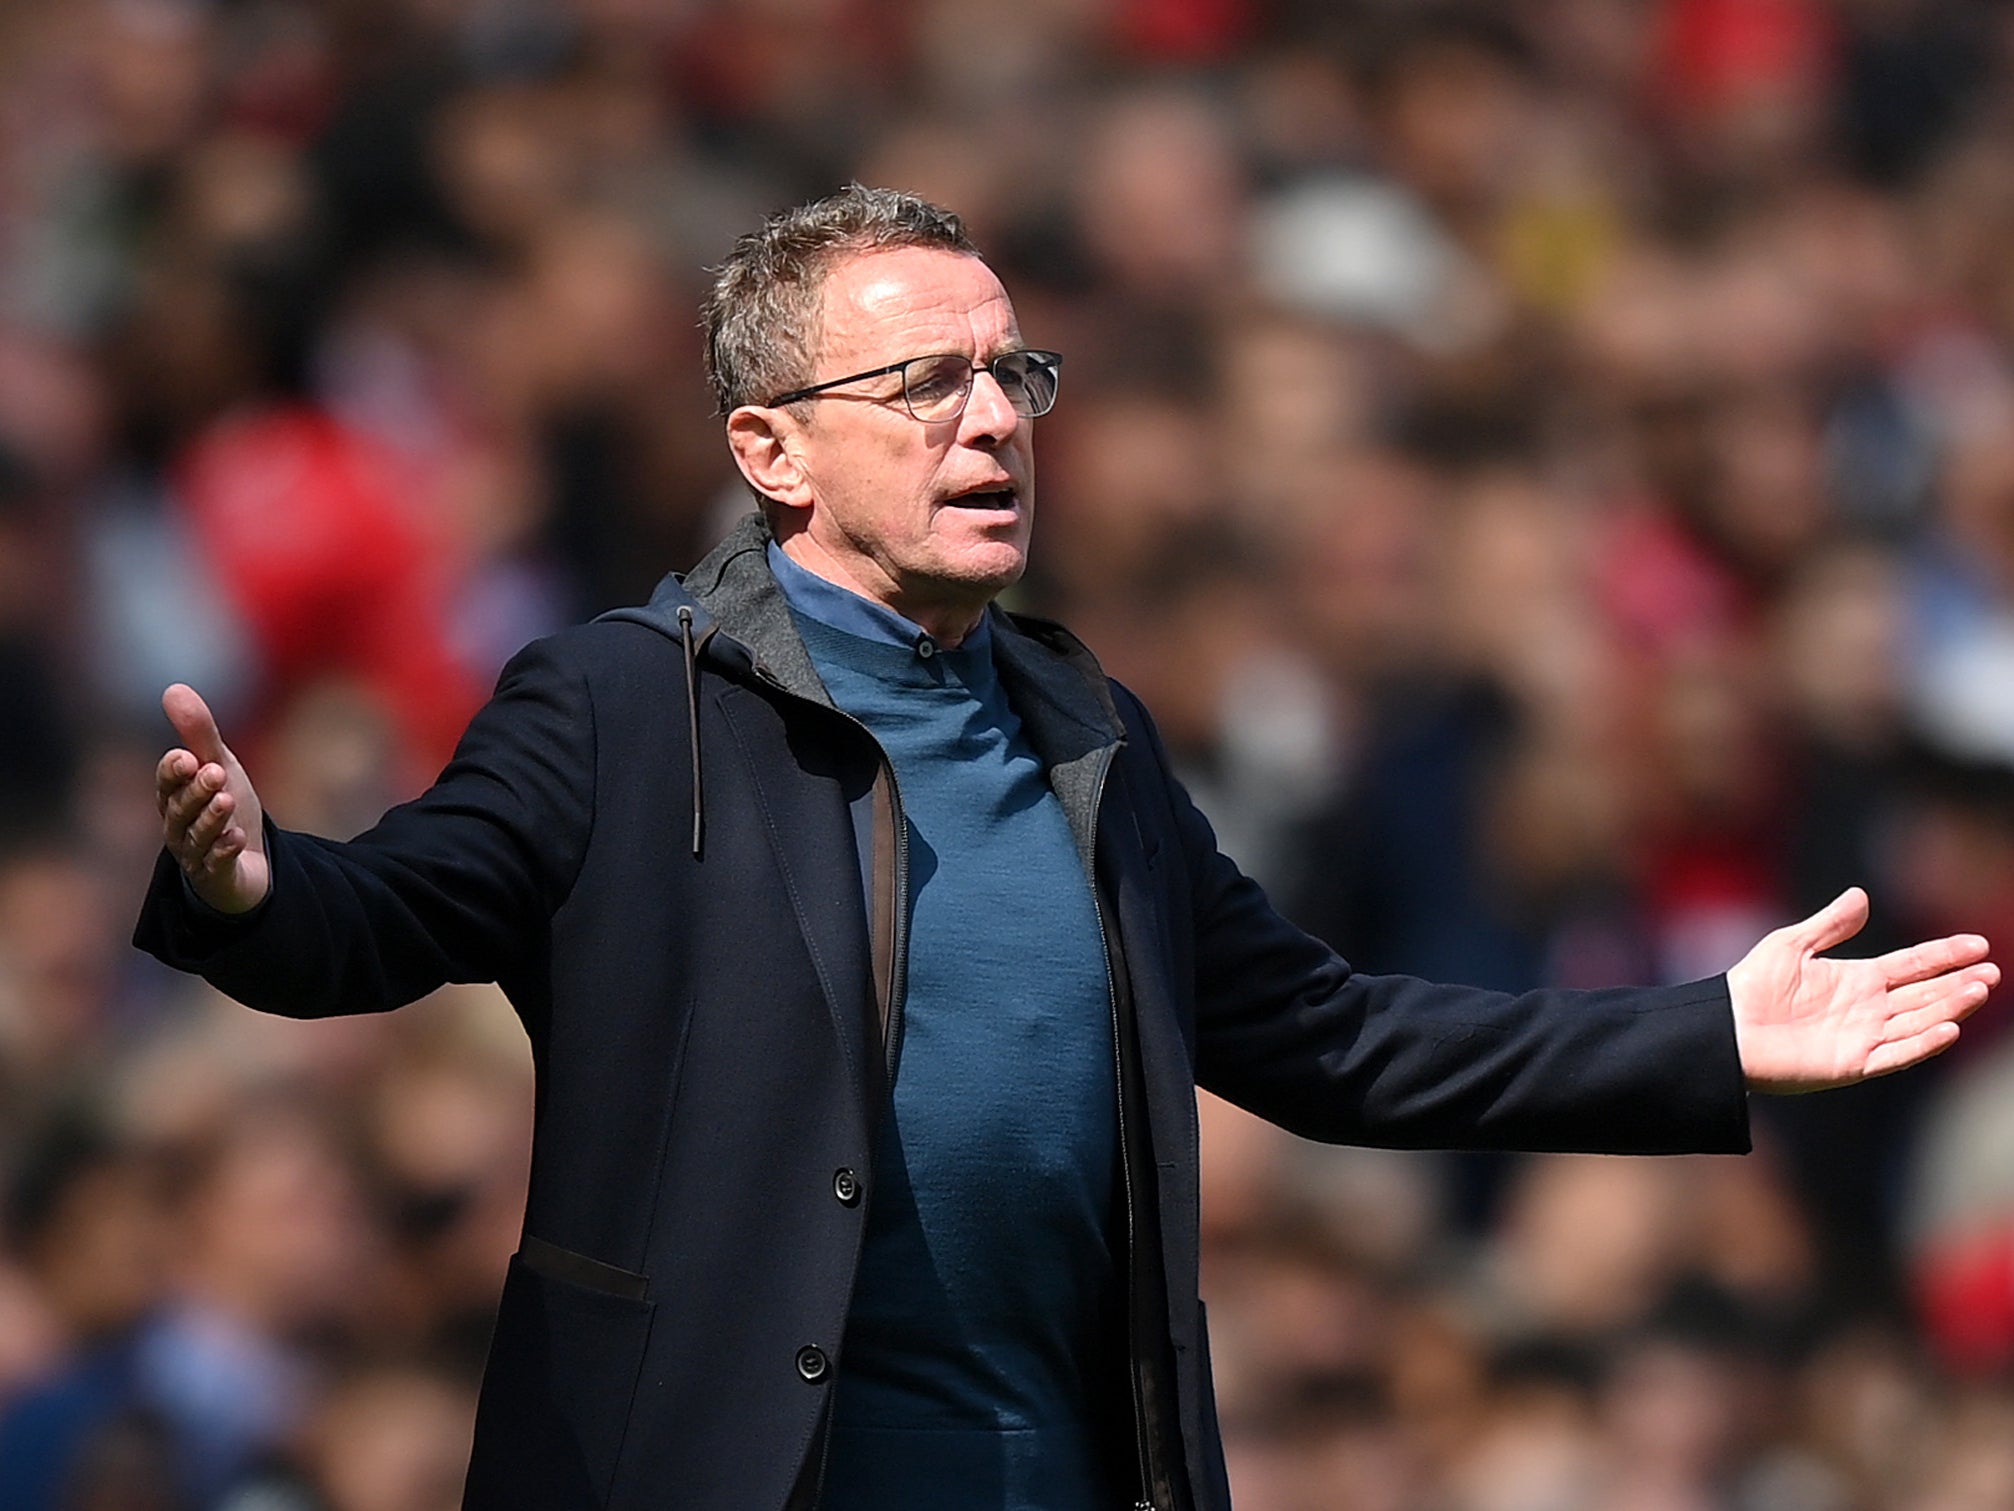 Ralf Rangnick leaves Old Trafford to begin his role as Austria coach